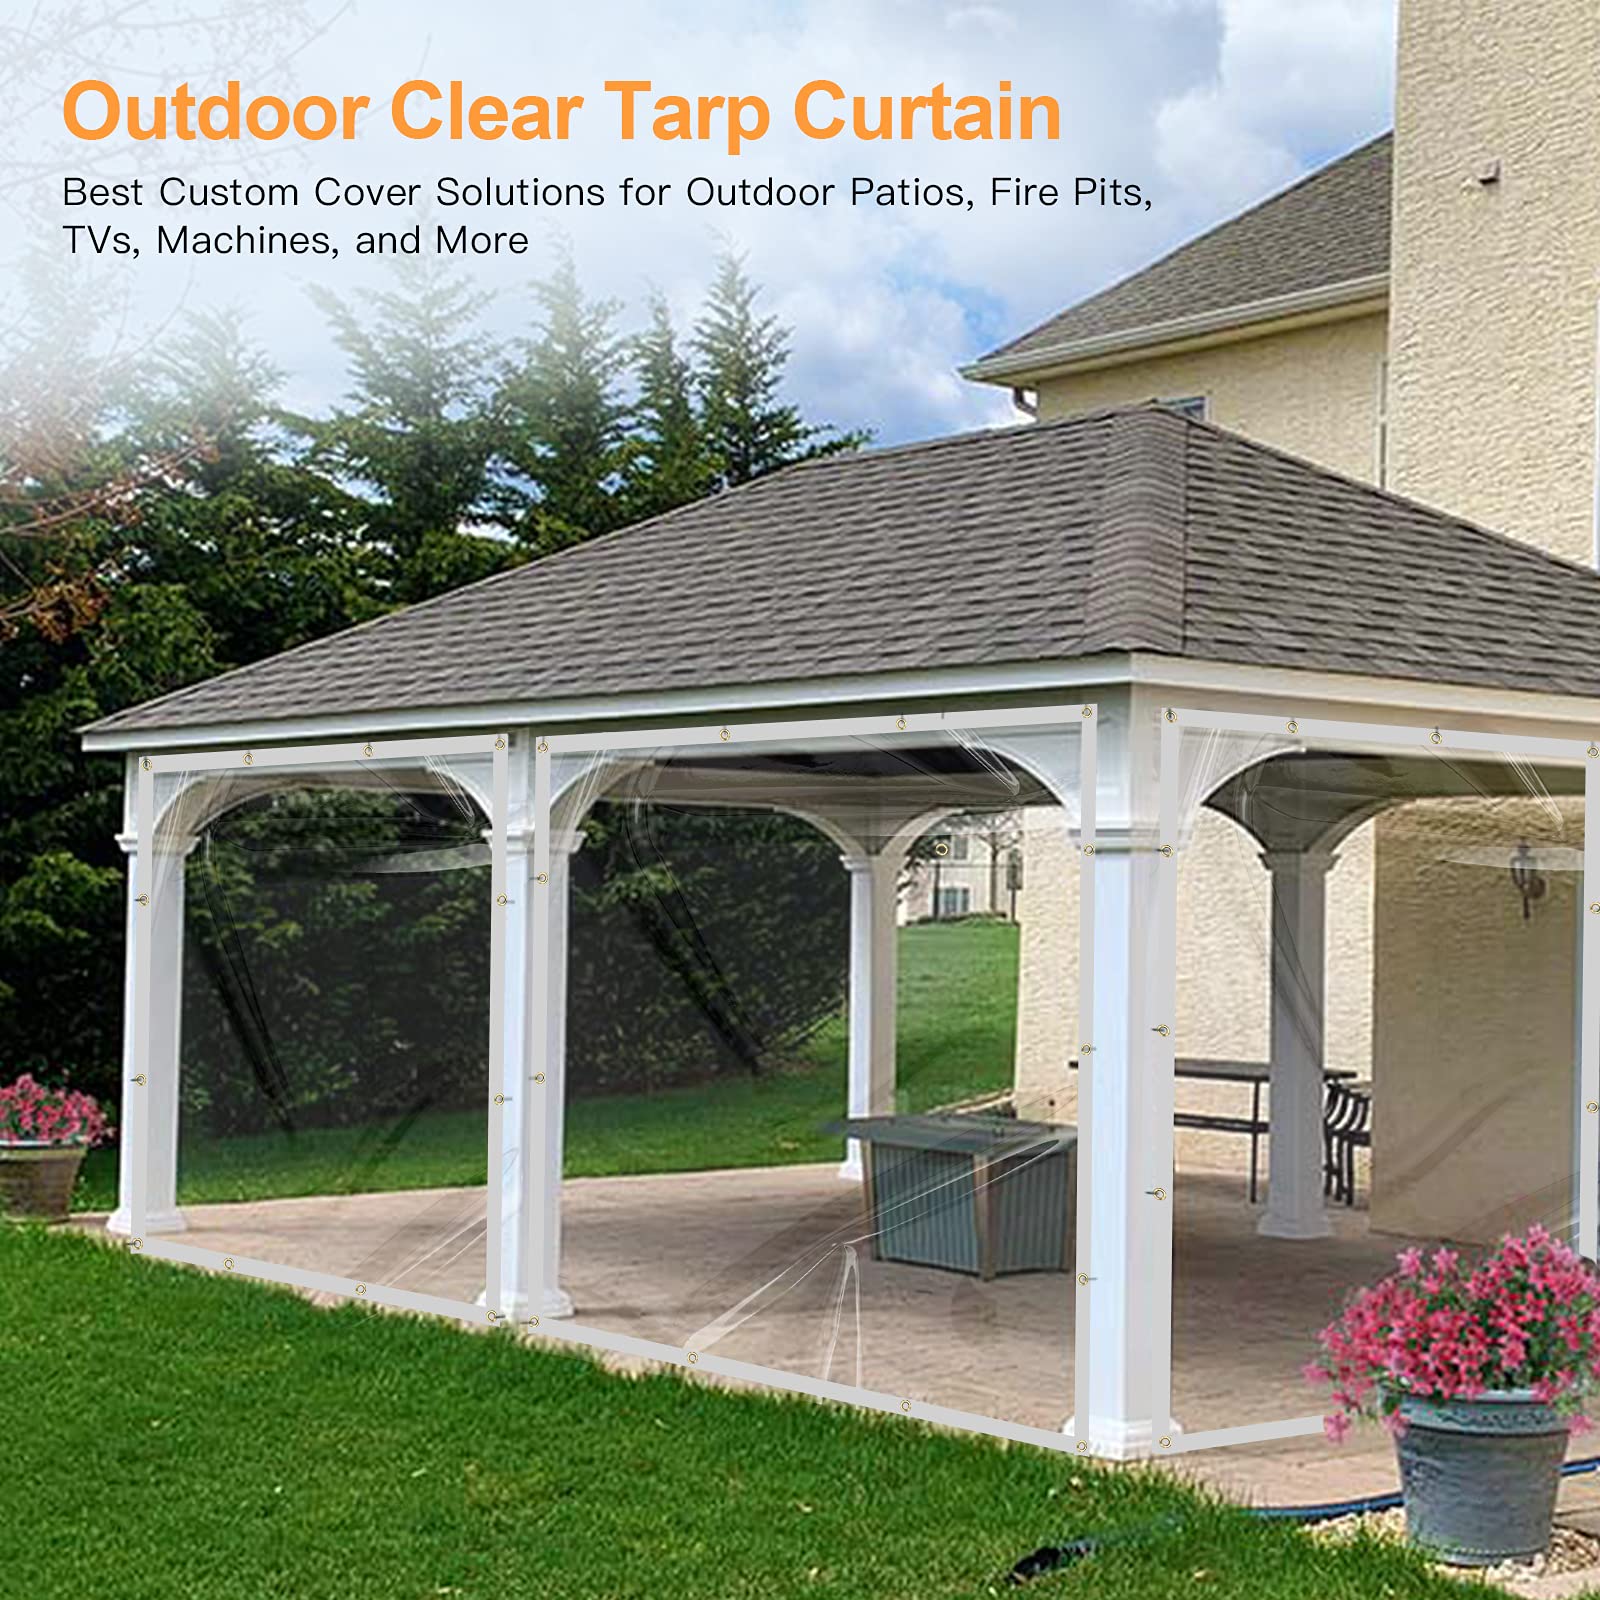 10 x 10FT Outdoor Clear Tarp Curtain Waterproof Wind-Proof 24 Mil Transparent Vinyl Tarp for Patio Pergola Garden Canopy Rainproof Anti-Tear PVC Thick Cover with Grommets